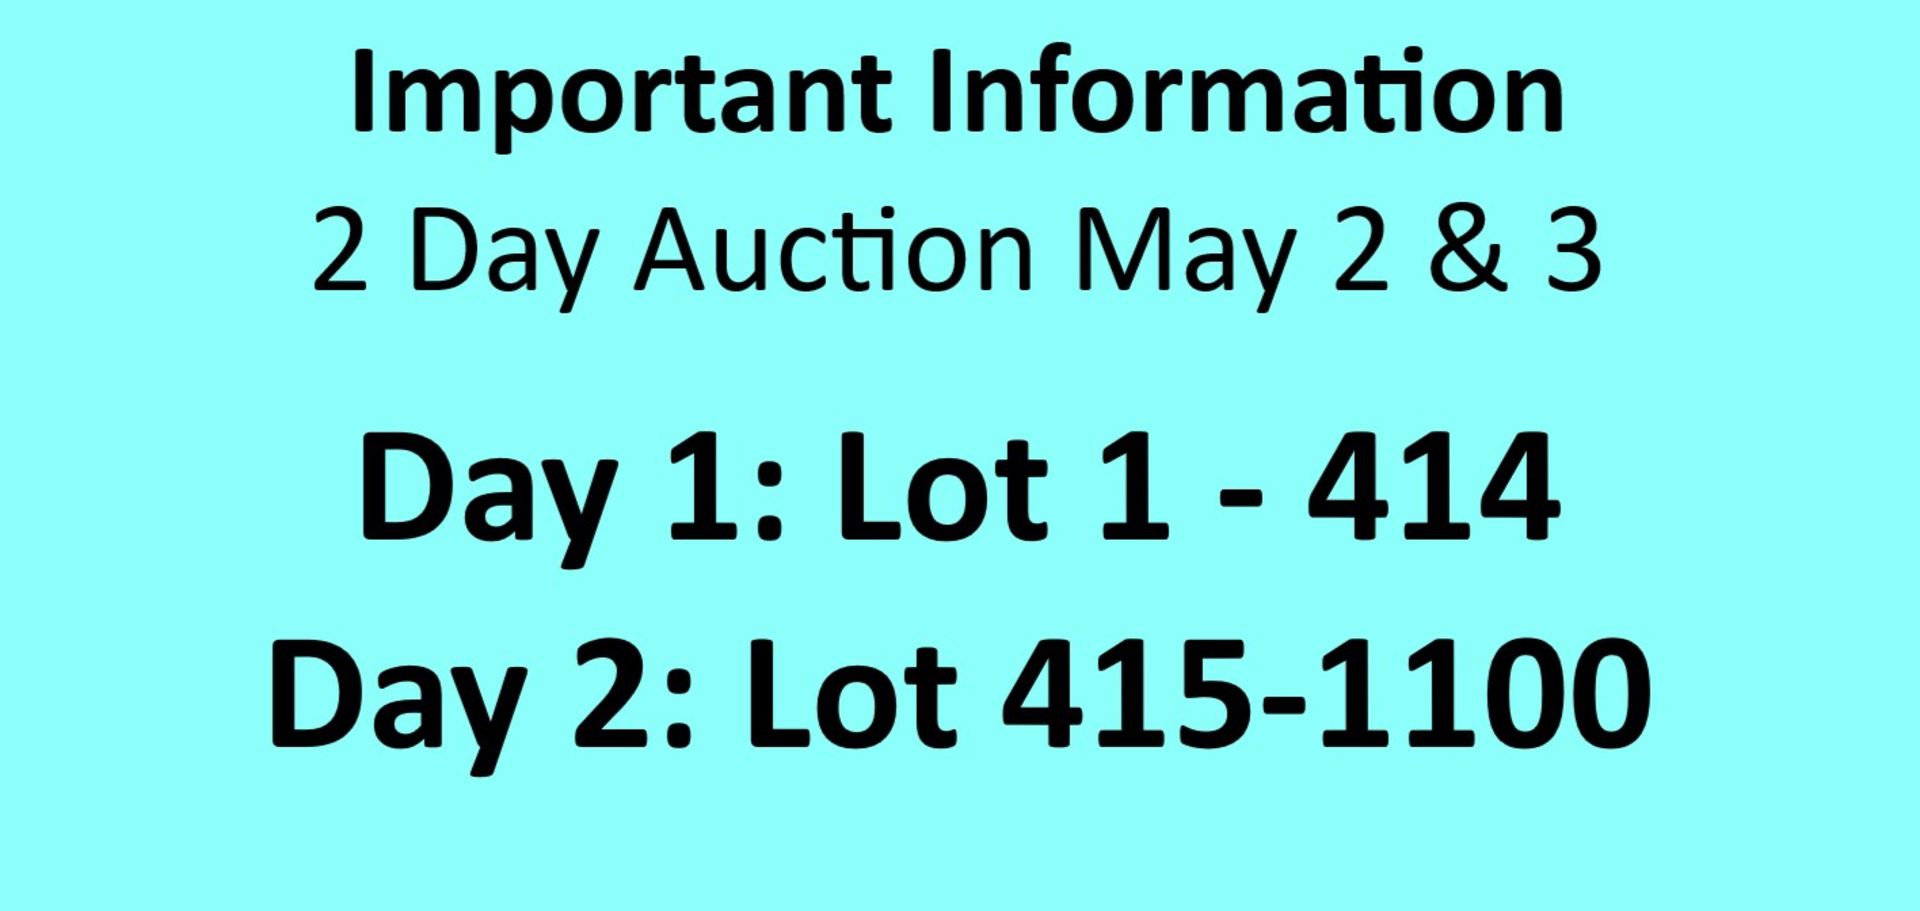 Important Information - Read Before Bidding